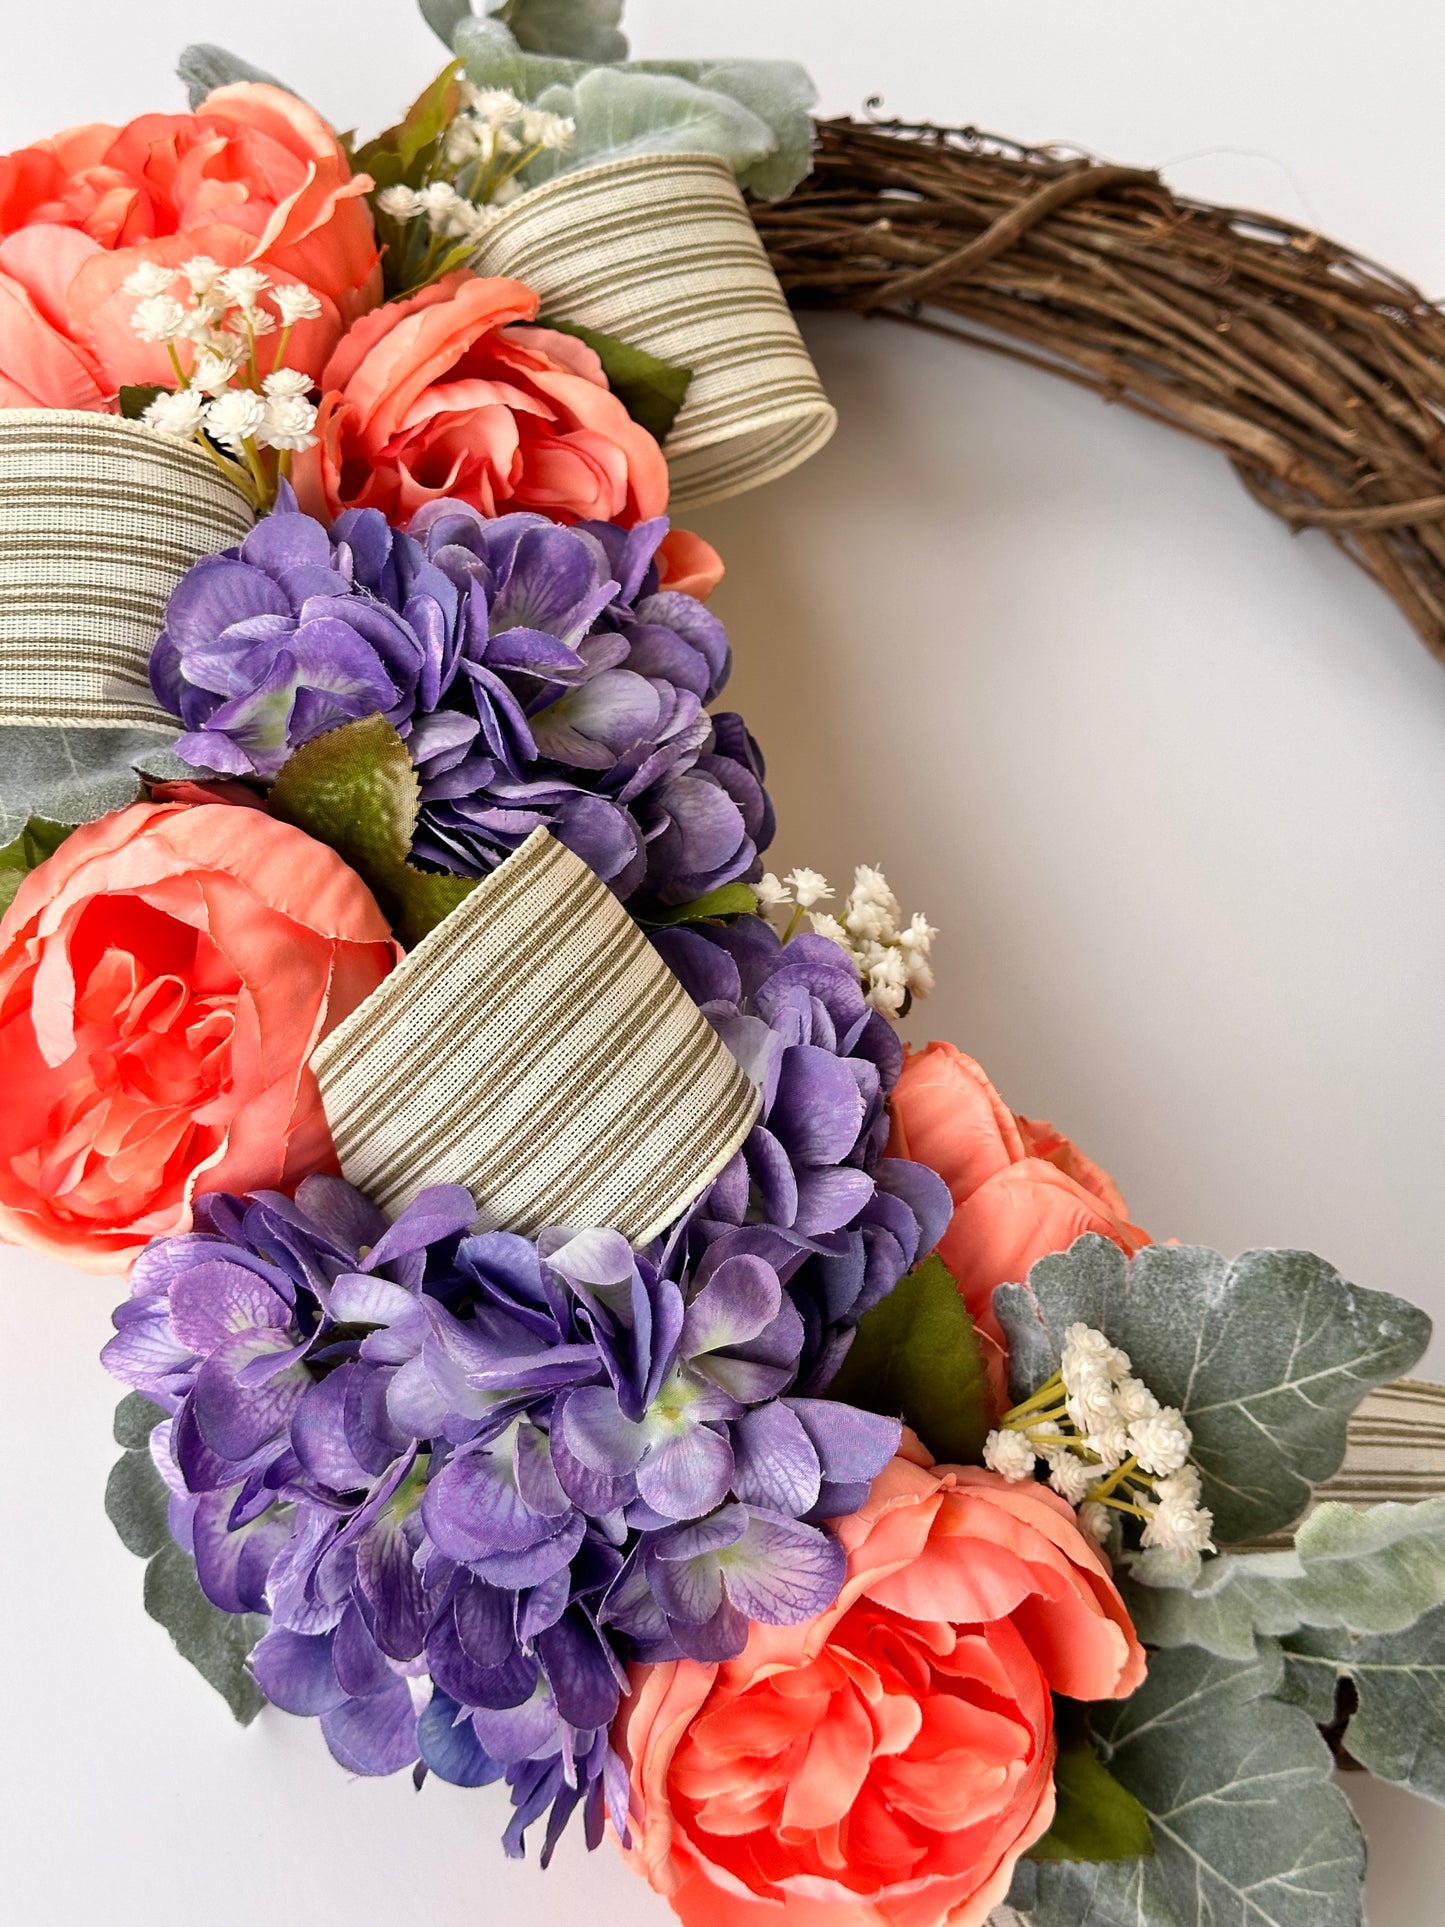 18 in. Vine Wreath with Artificial Orange Peonias and Purple Hydrangea, with Wild Greenery